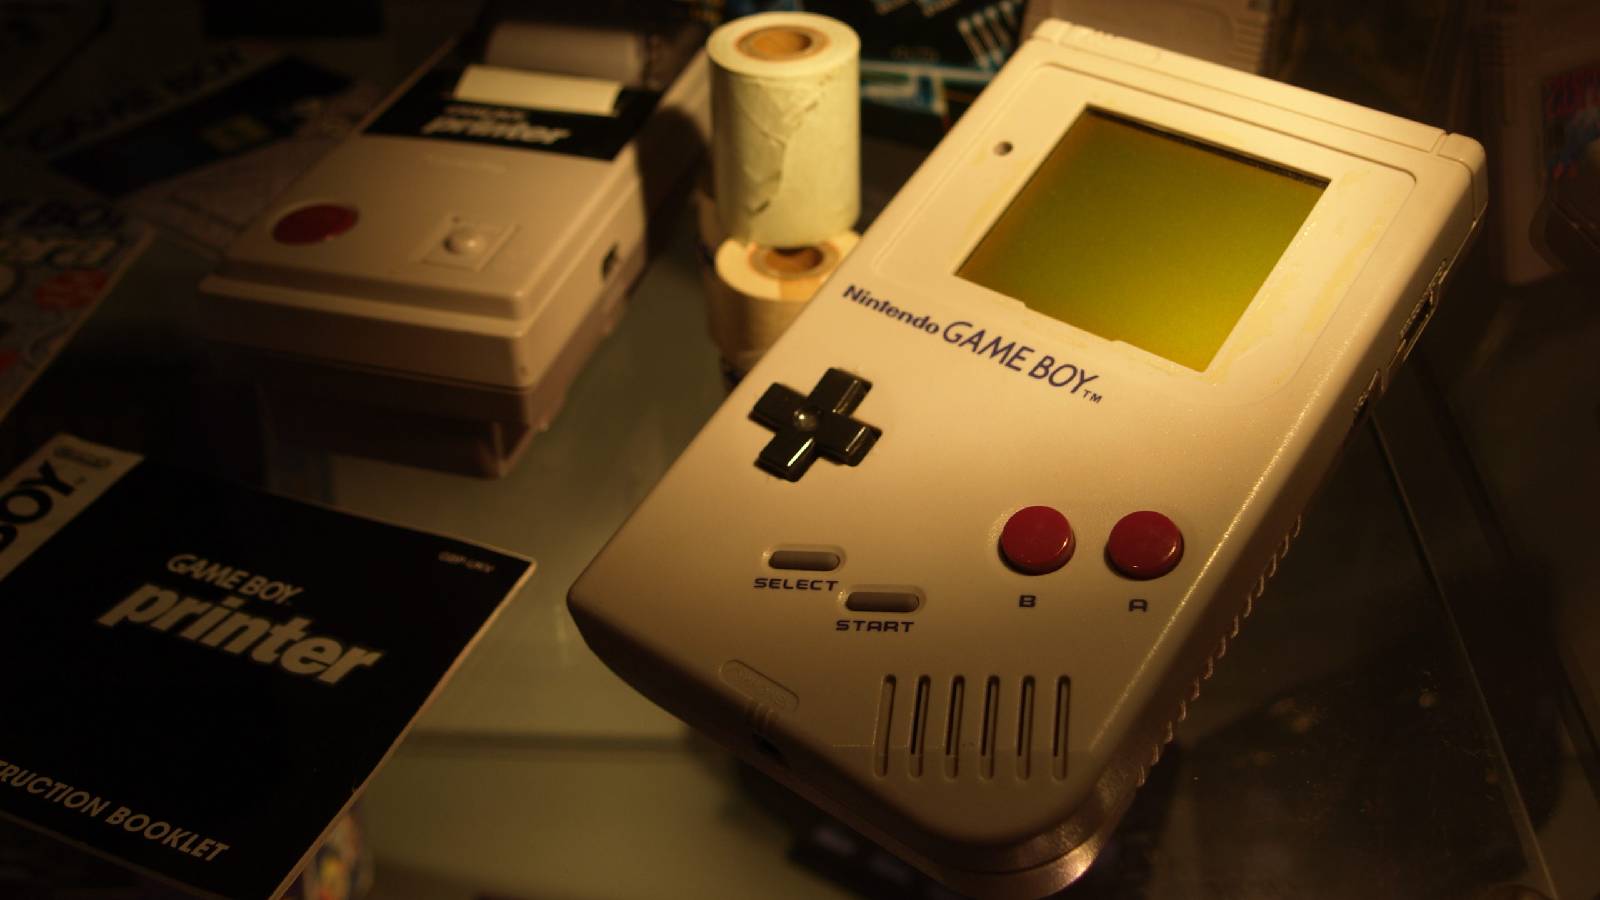 Game Boy in display at National Videogame Museum